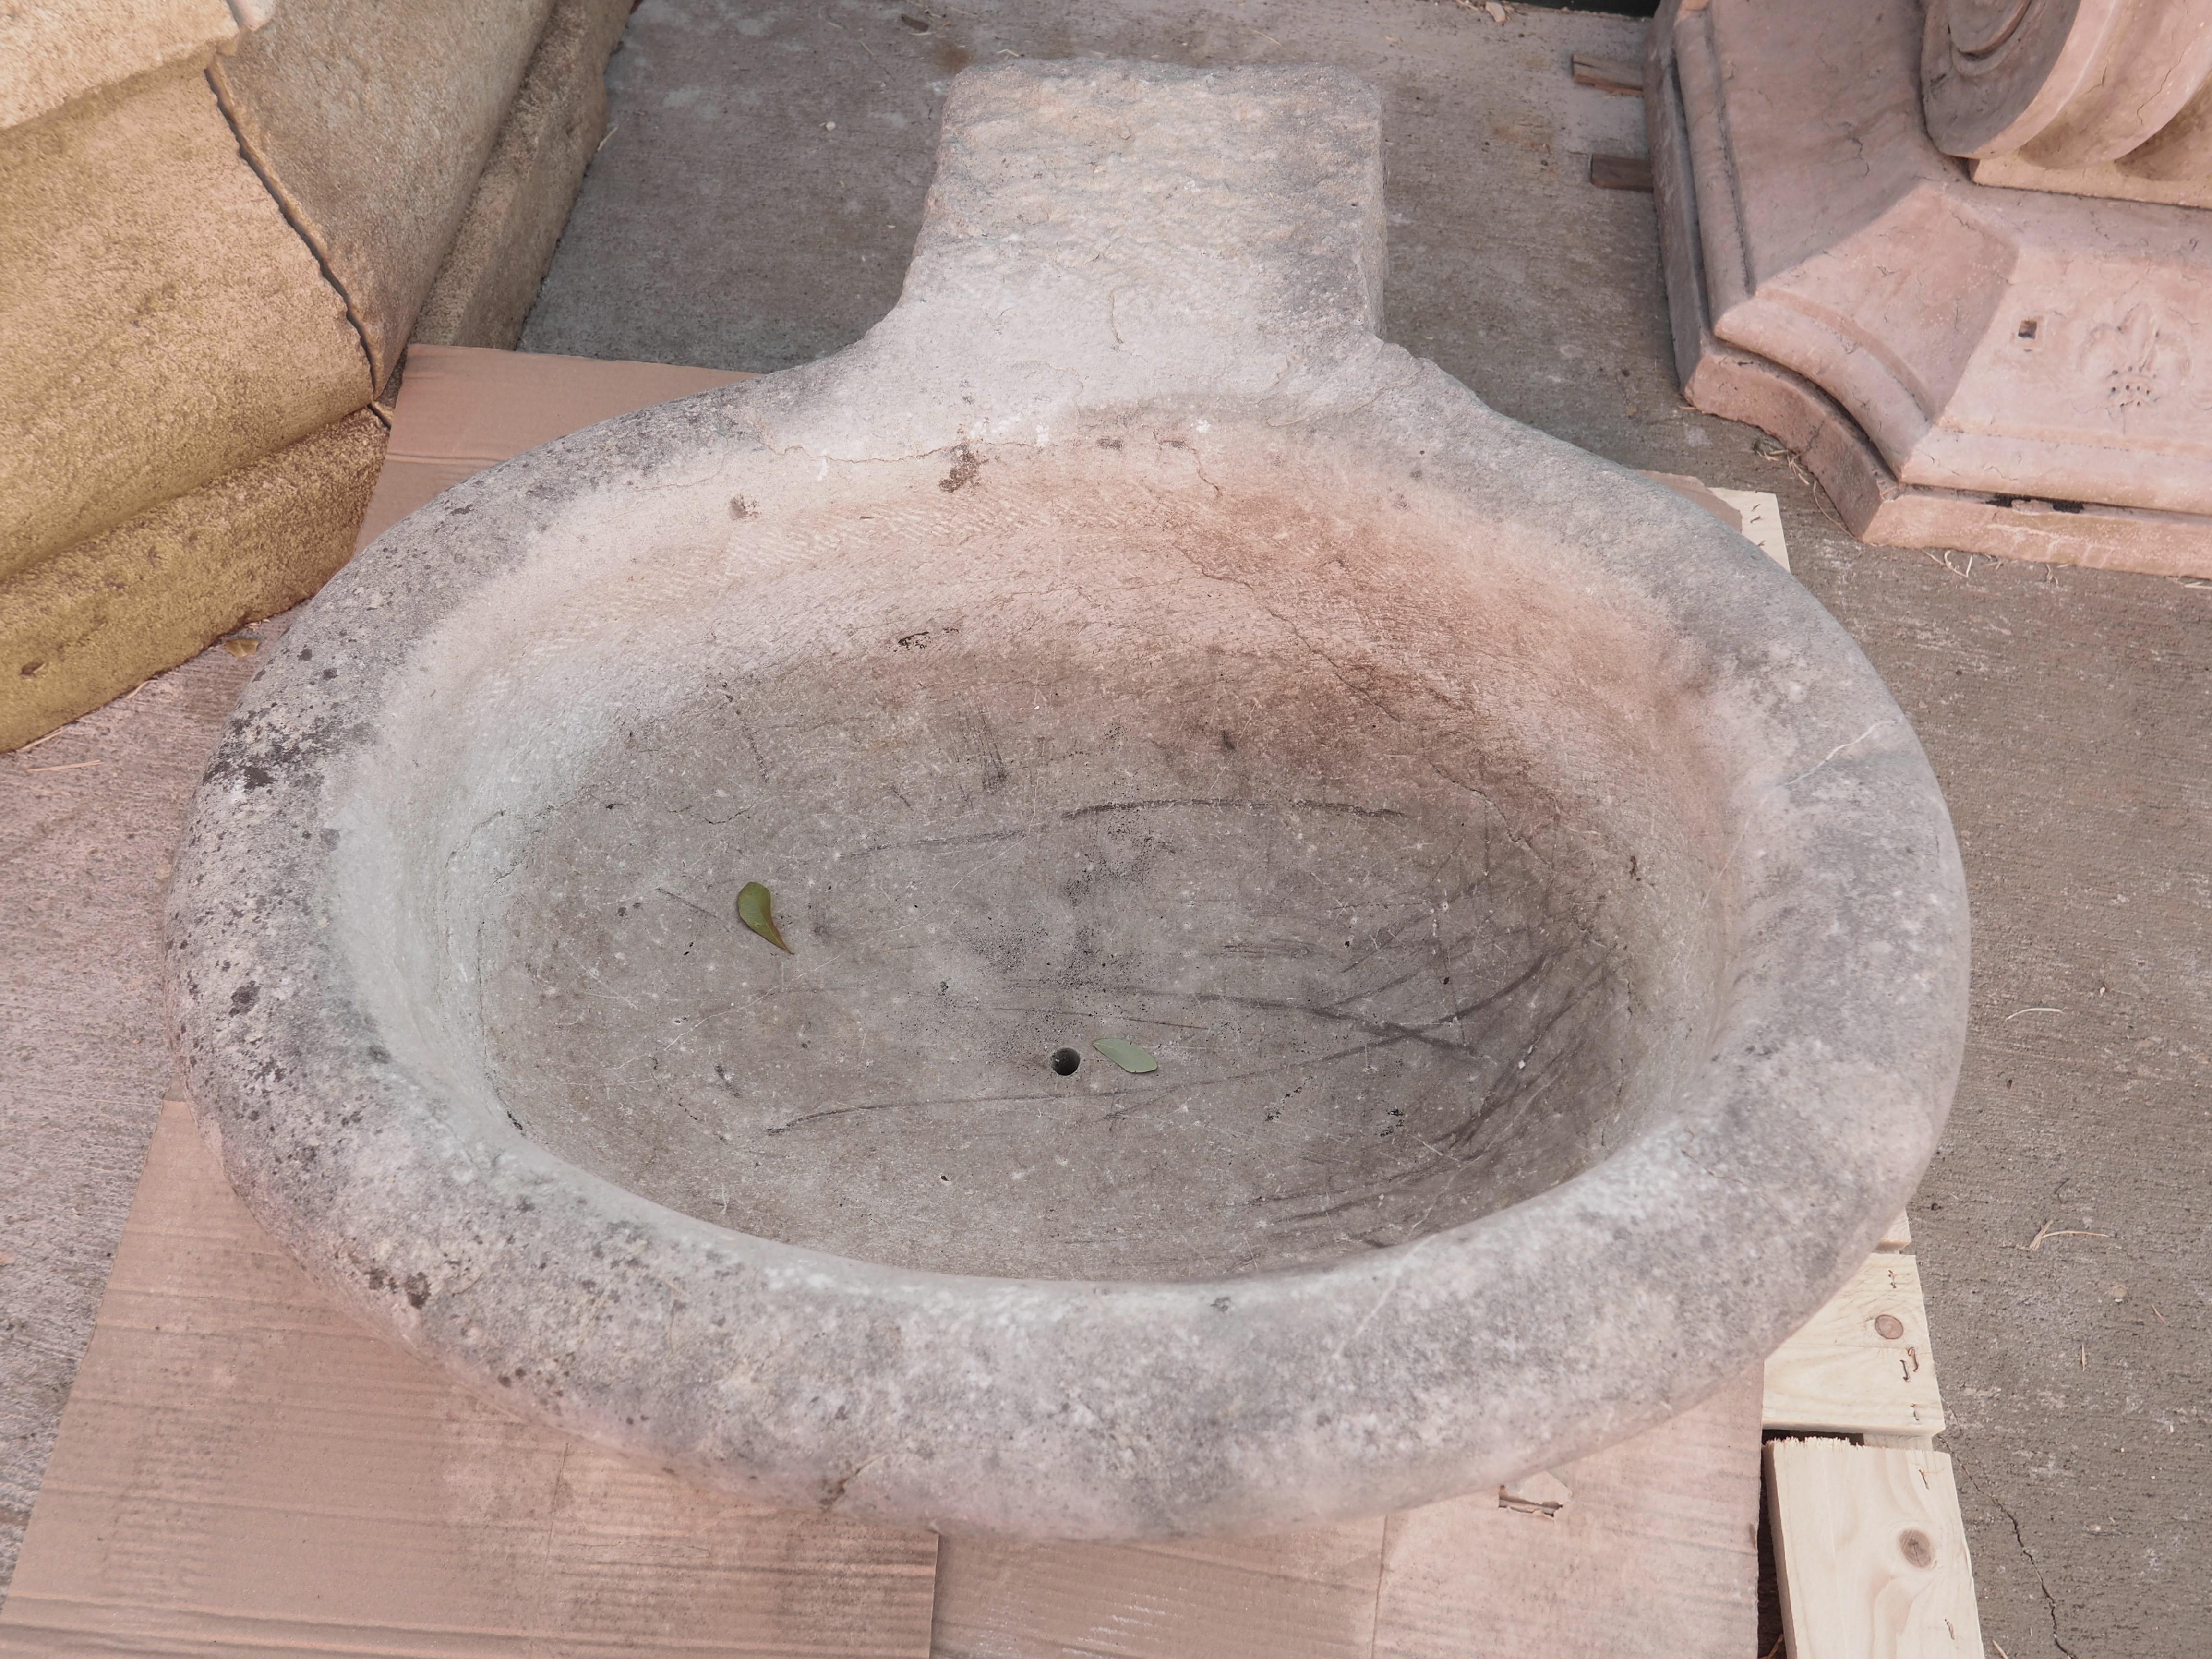 Salvaged from the garden of an Italian villa, this marble basin was hand-carved in the early 1900’s and most recently used as a planter. The ovate shaped bowl has an exterior width of 31 inches and has a small drainage hole in the bottom. A square,